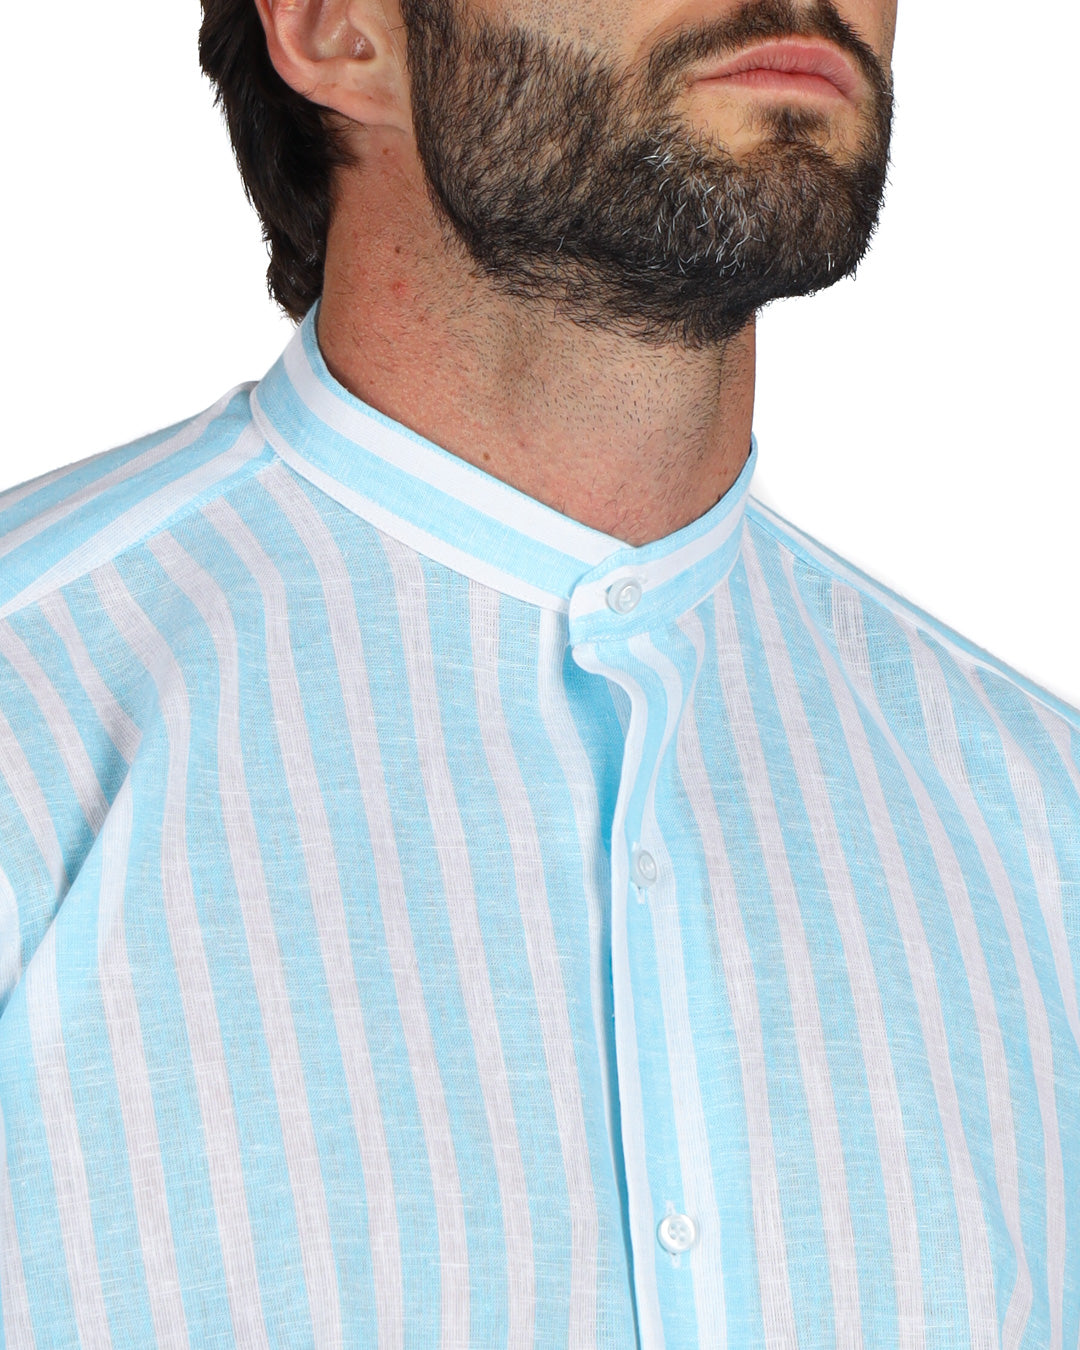 Procida - Korean shirt with turquoise wide stripes in linen